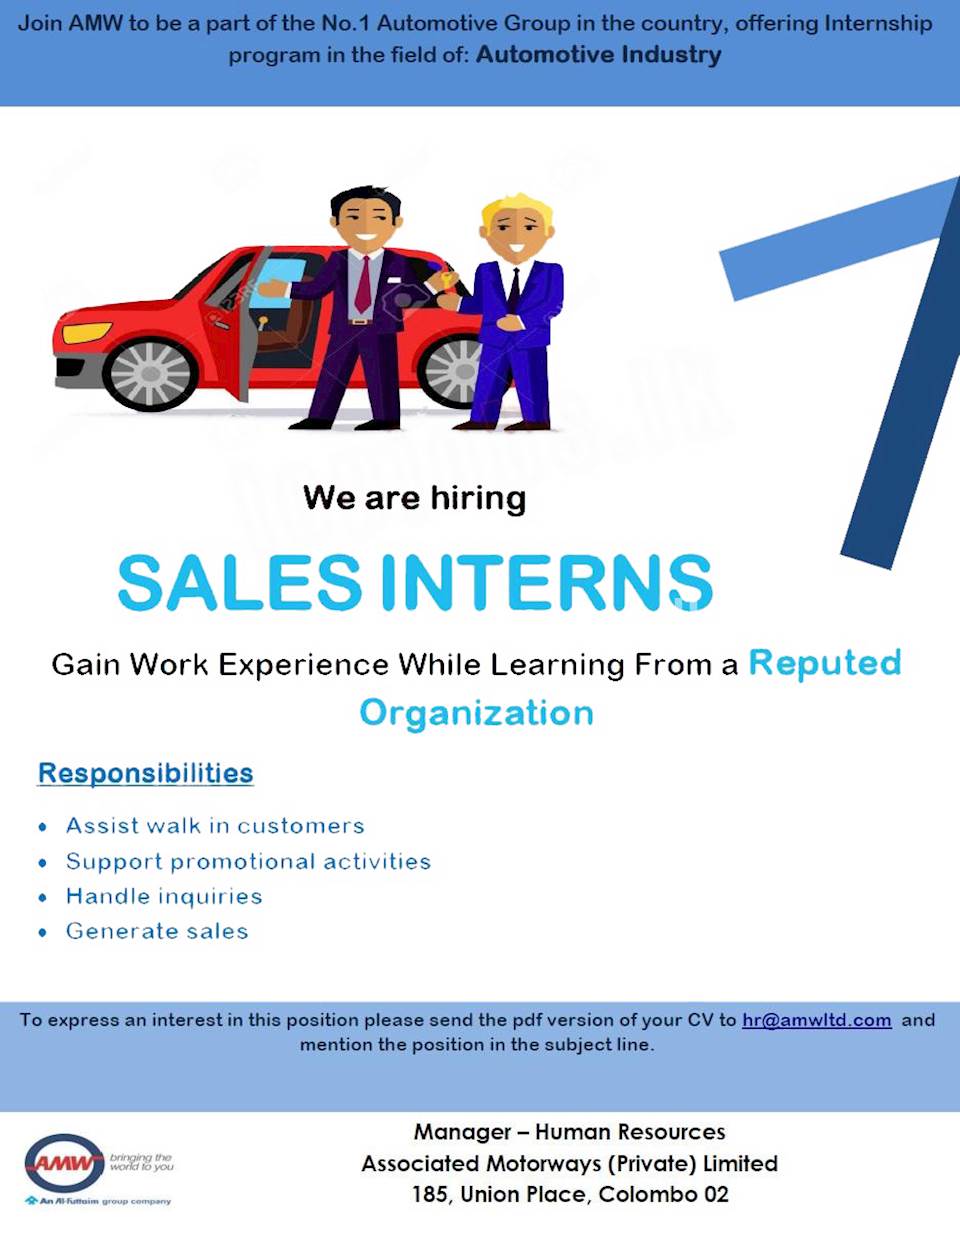 Sales Interns at Associated Motorways (Private) Limited